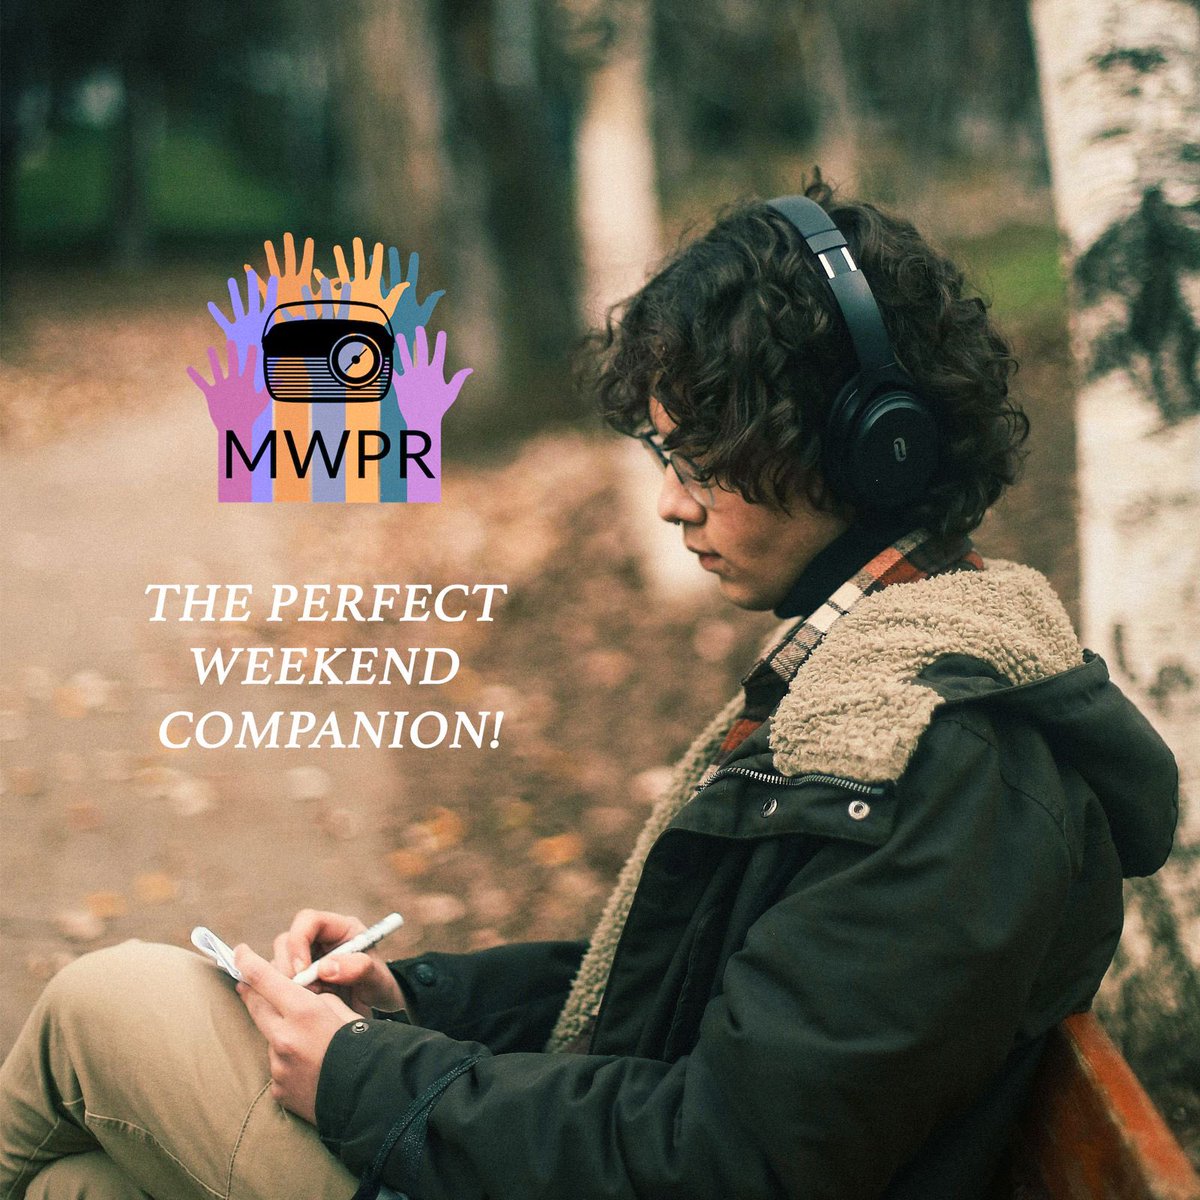 With great music all through the day and chilled mindfulness programming at night, MWPR makes a perfect weekend companion.

Available 24 hours a day worldwide on #Streema #MyTuner #Liveradio #RadioguideFM #RadioLine and other popular streaming radio services